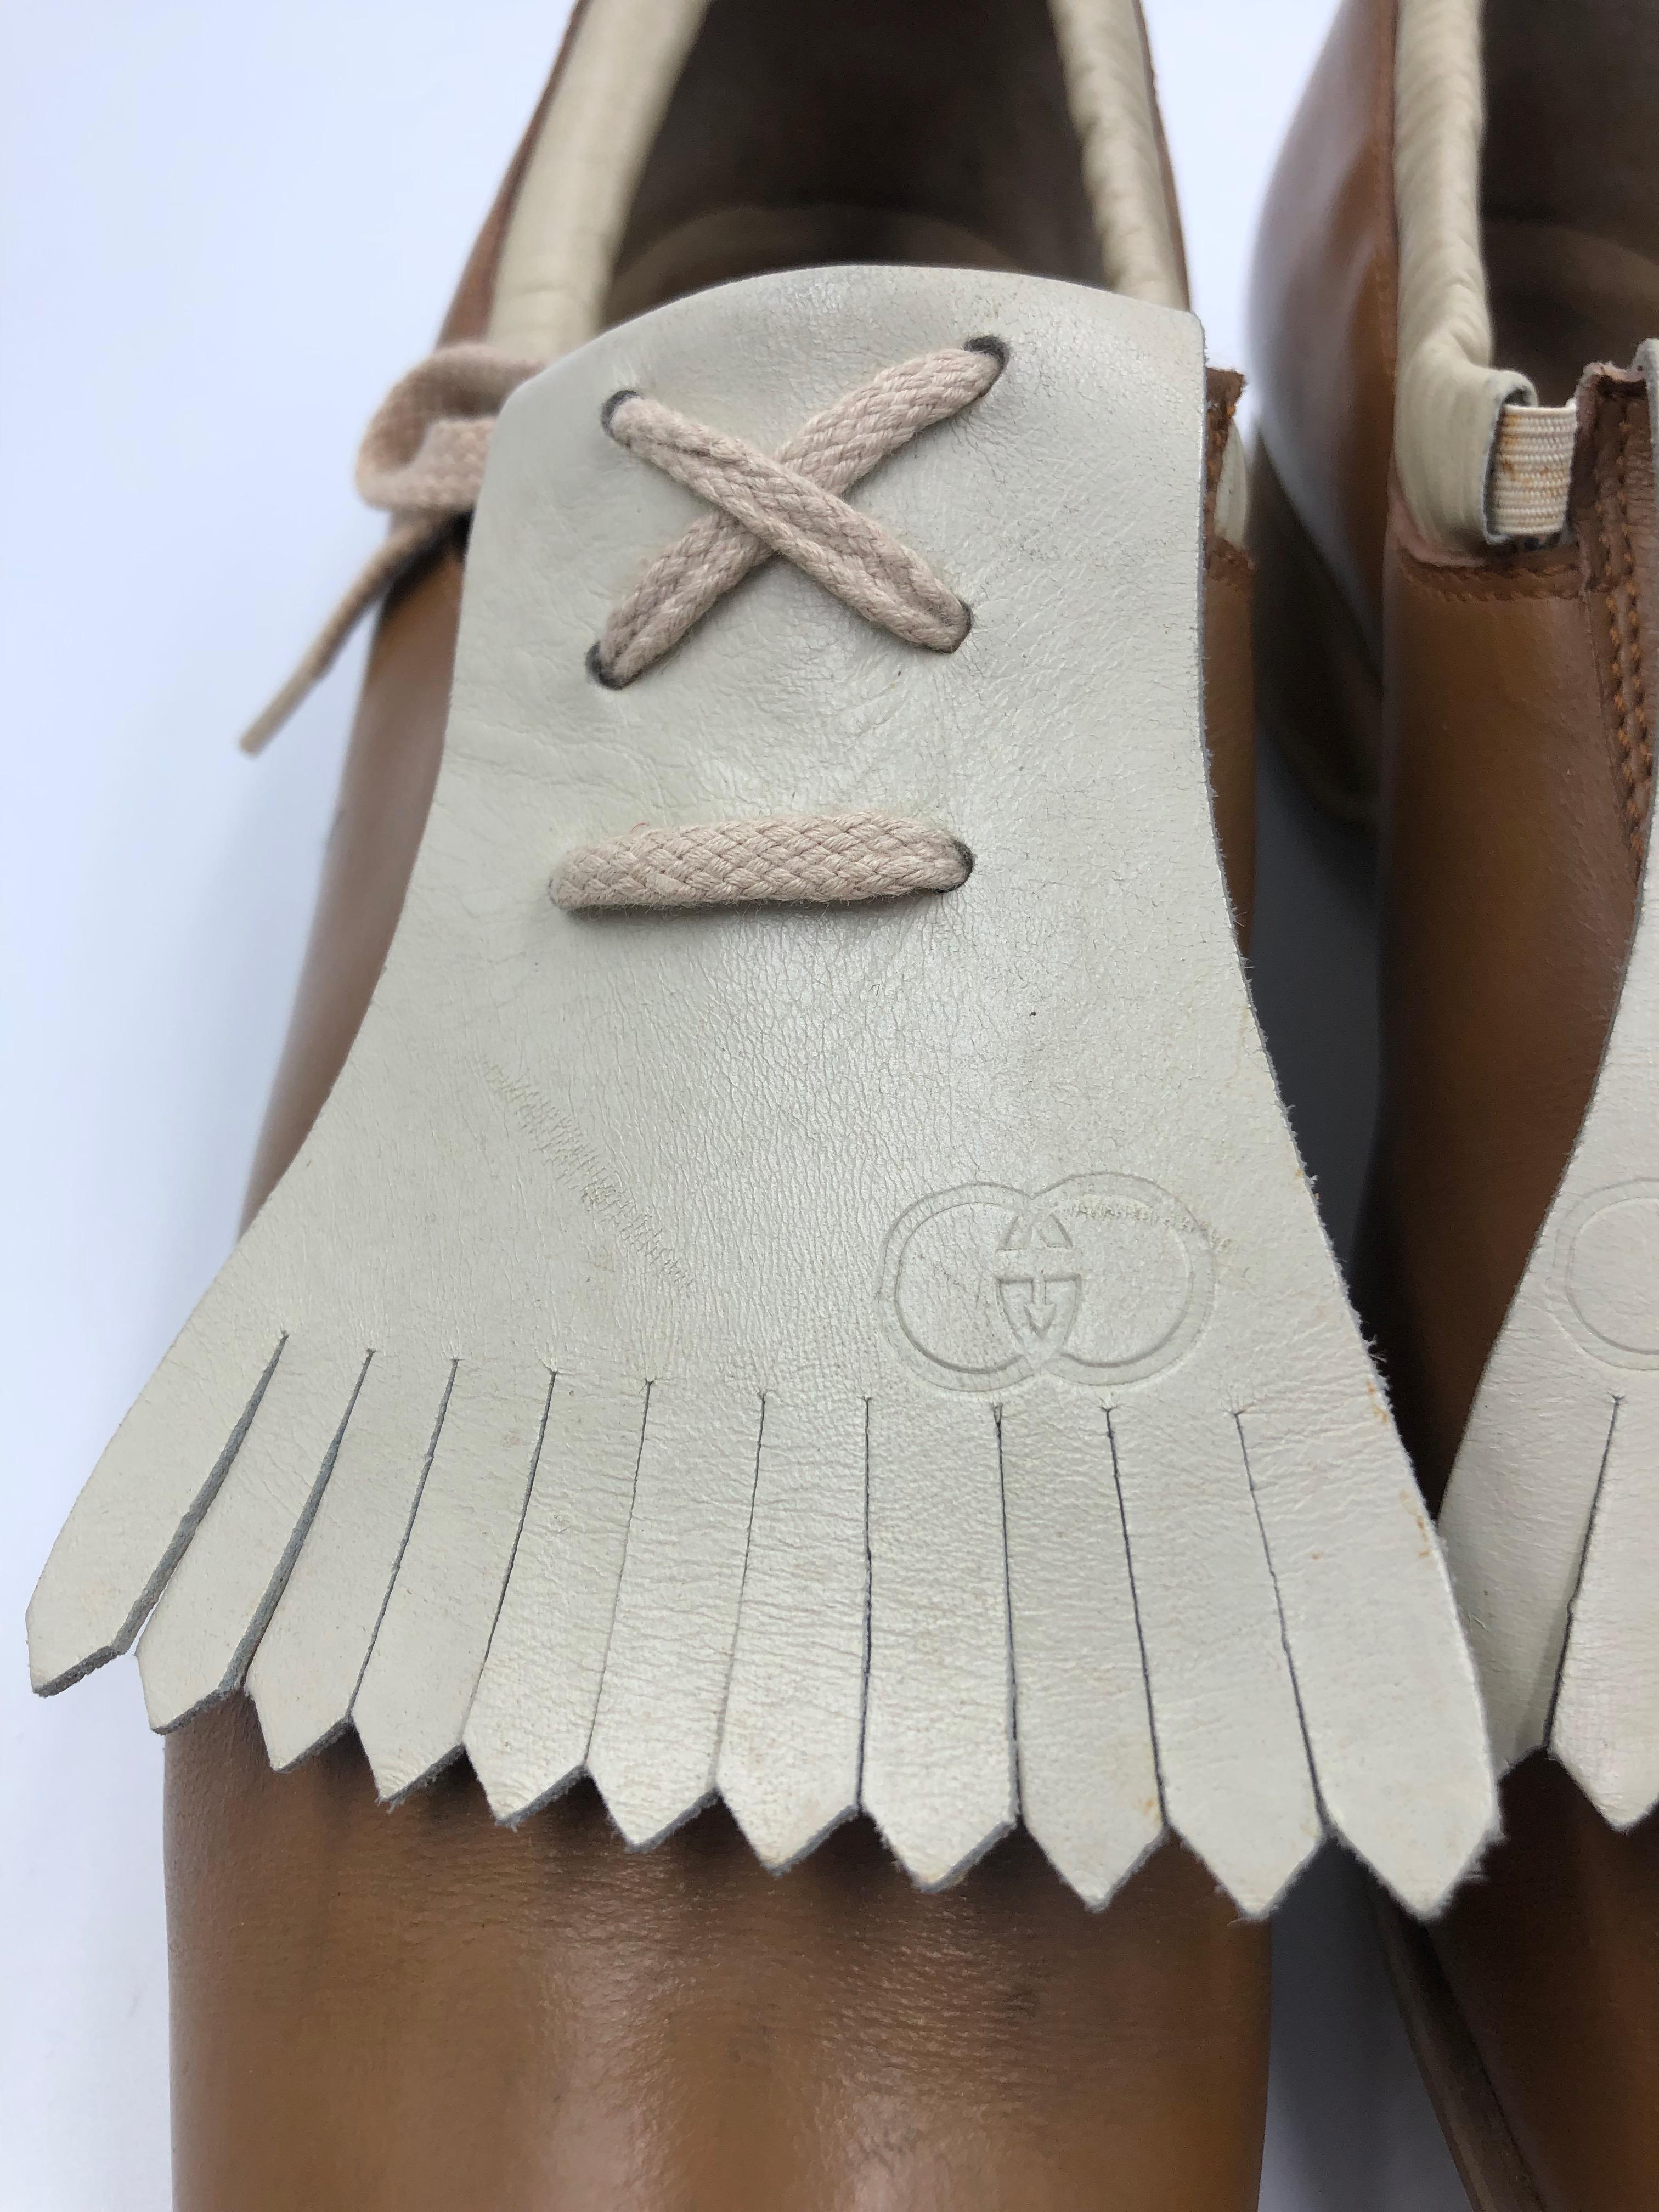 Gucci Collectors Vintage Golf Shoe with marked Gucci Cleats. Tan and Cream with fringe flap.
Golf shoe marked inside 39 1/2 ; we tried on the golf shoe and it fits more of a real 8 1/2. This is an ultimate piece for a Gucci collector.  Condition